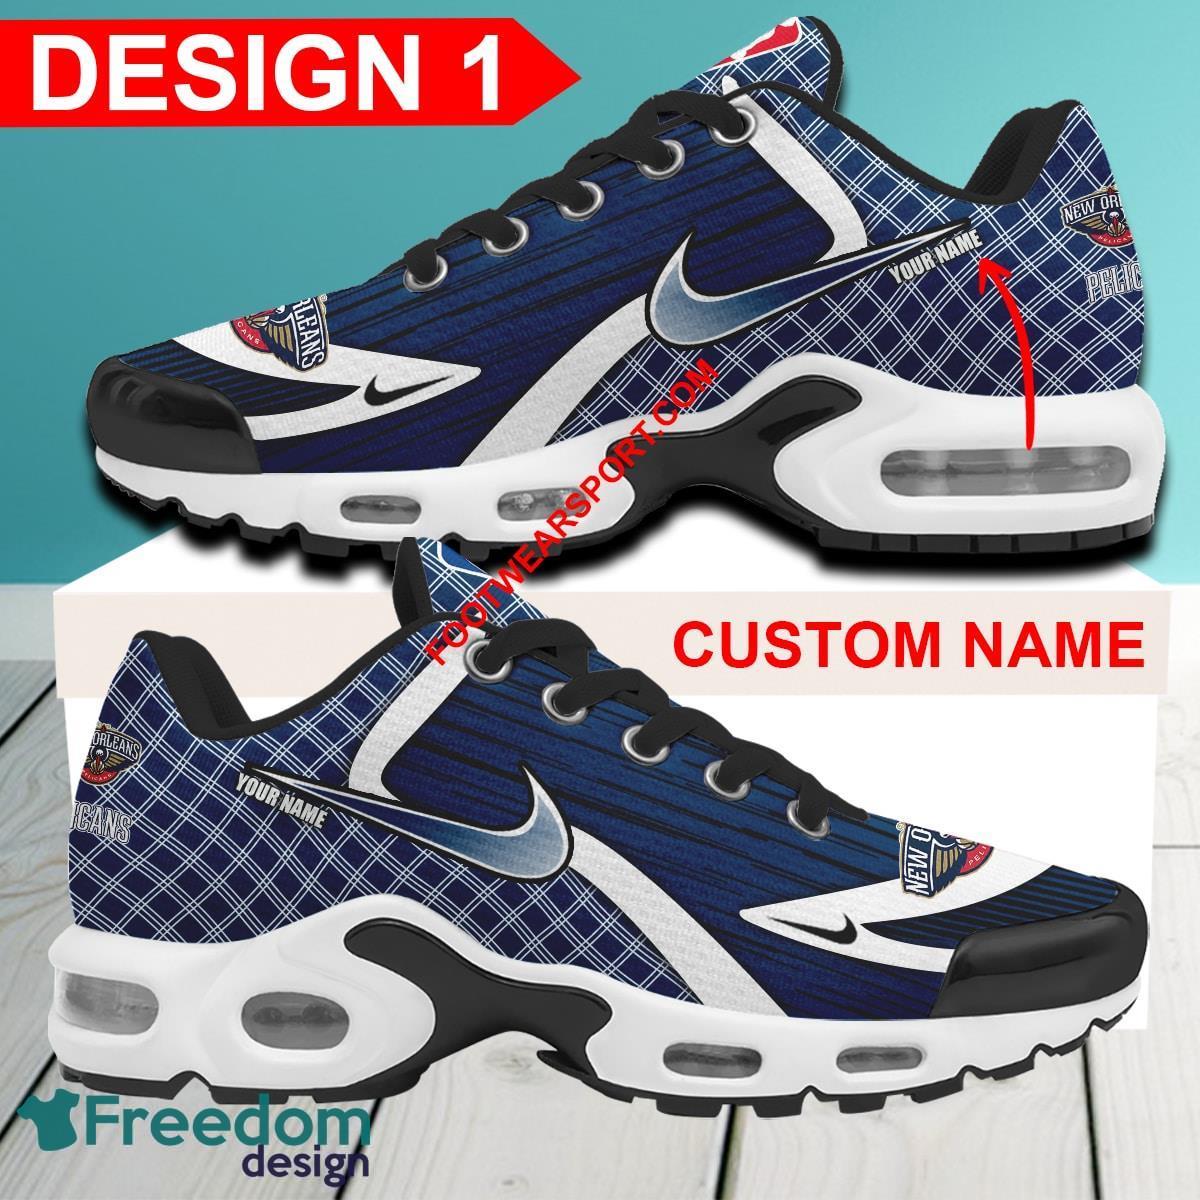 Custom Name NBA New Orleans Pelicans Air Cushion Sport Shoes TN Sneakers For Fans Gift - NBA New Orleans Pelicans Air Cushion Sport Shoes Style 1 TN Sneakers